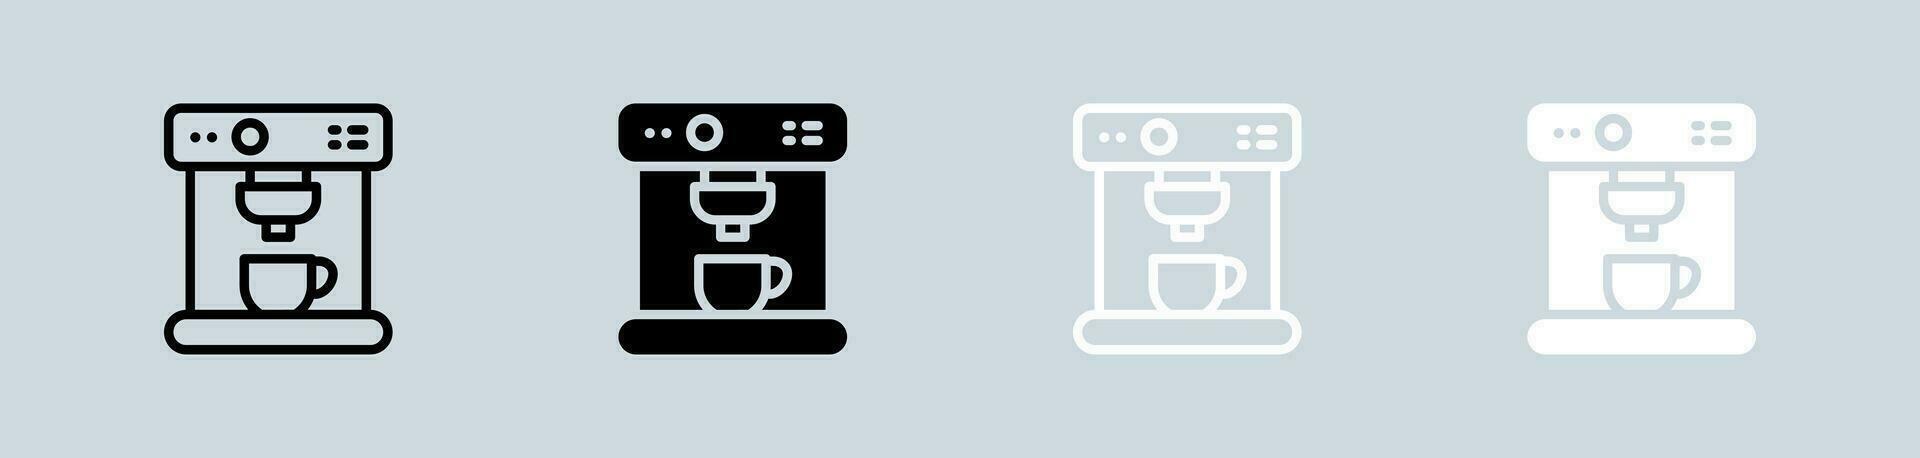 Coffee machine icon set in black and white. Coffeemaker signs vector illustration.